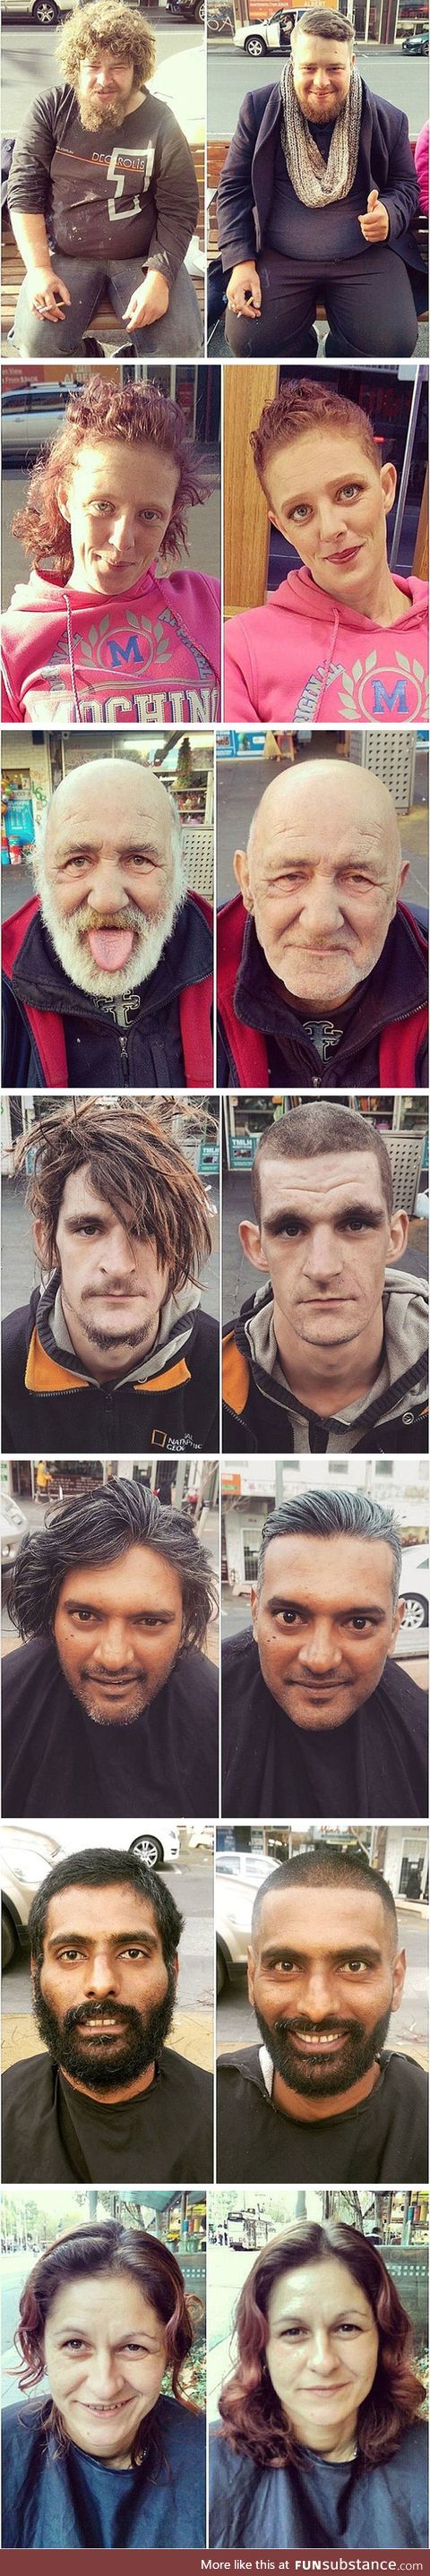 Good guy aussie barber helping the homeless